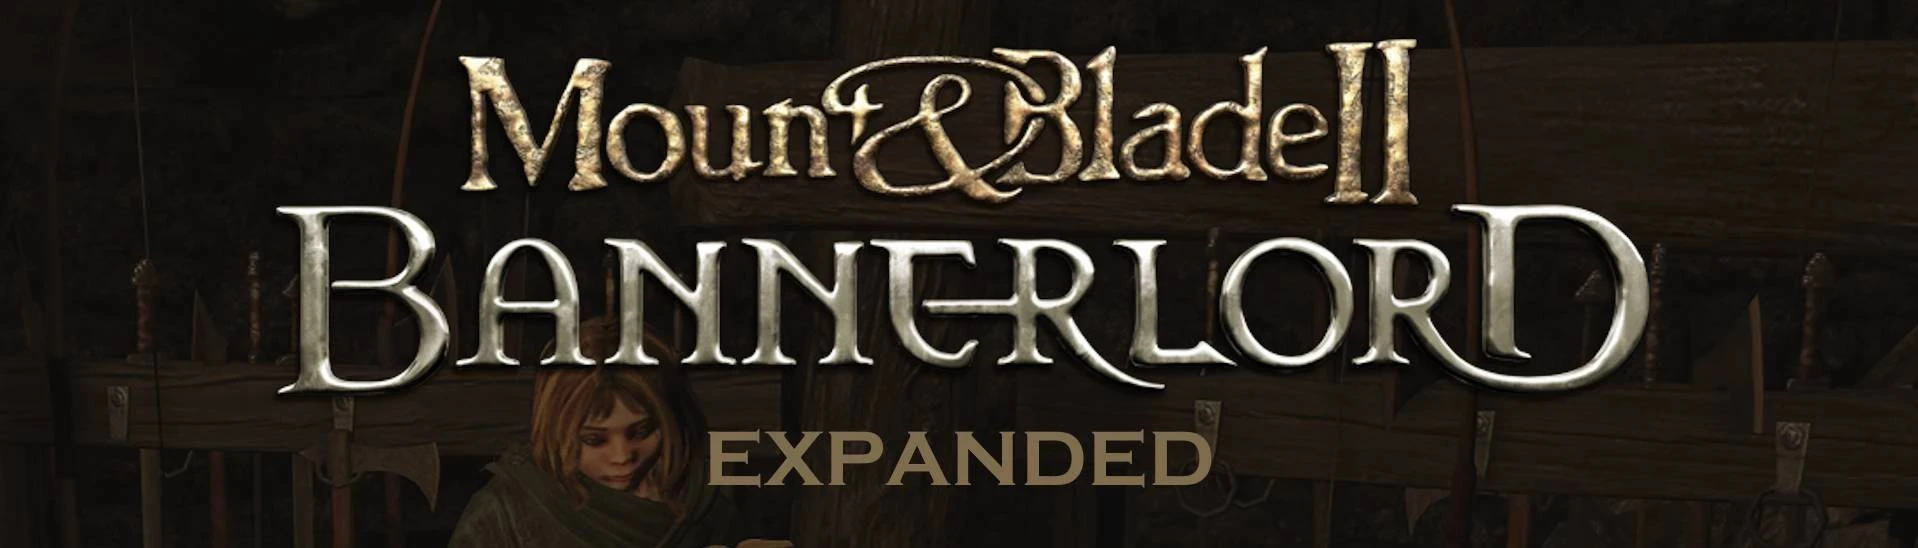 Bannerlord Expanded Children Expanded [支持1.2.9][汉化][转载]